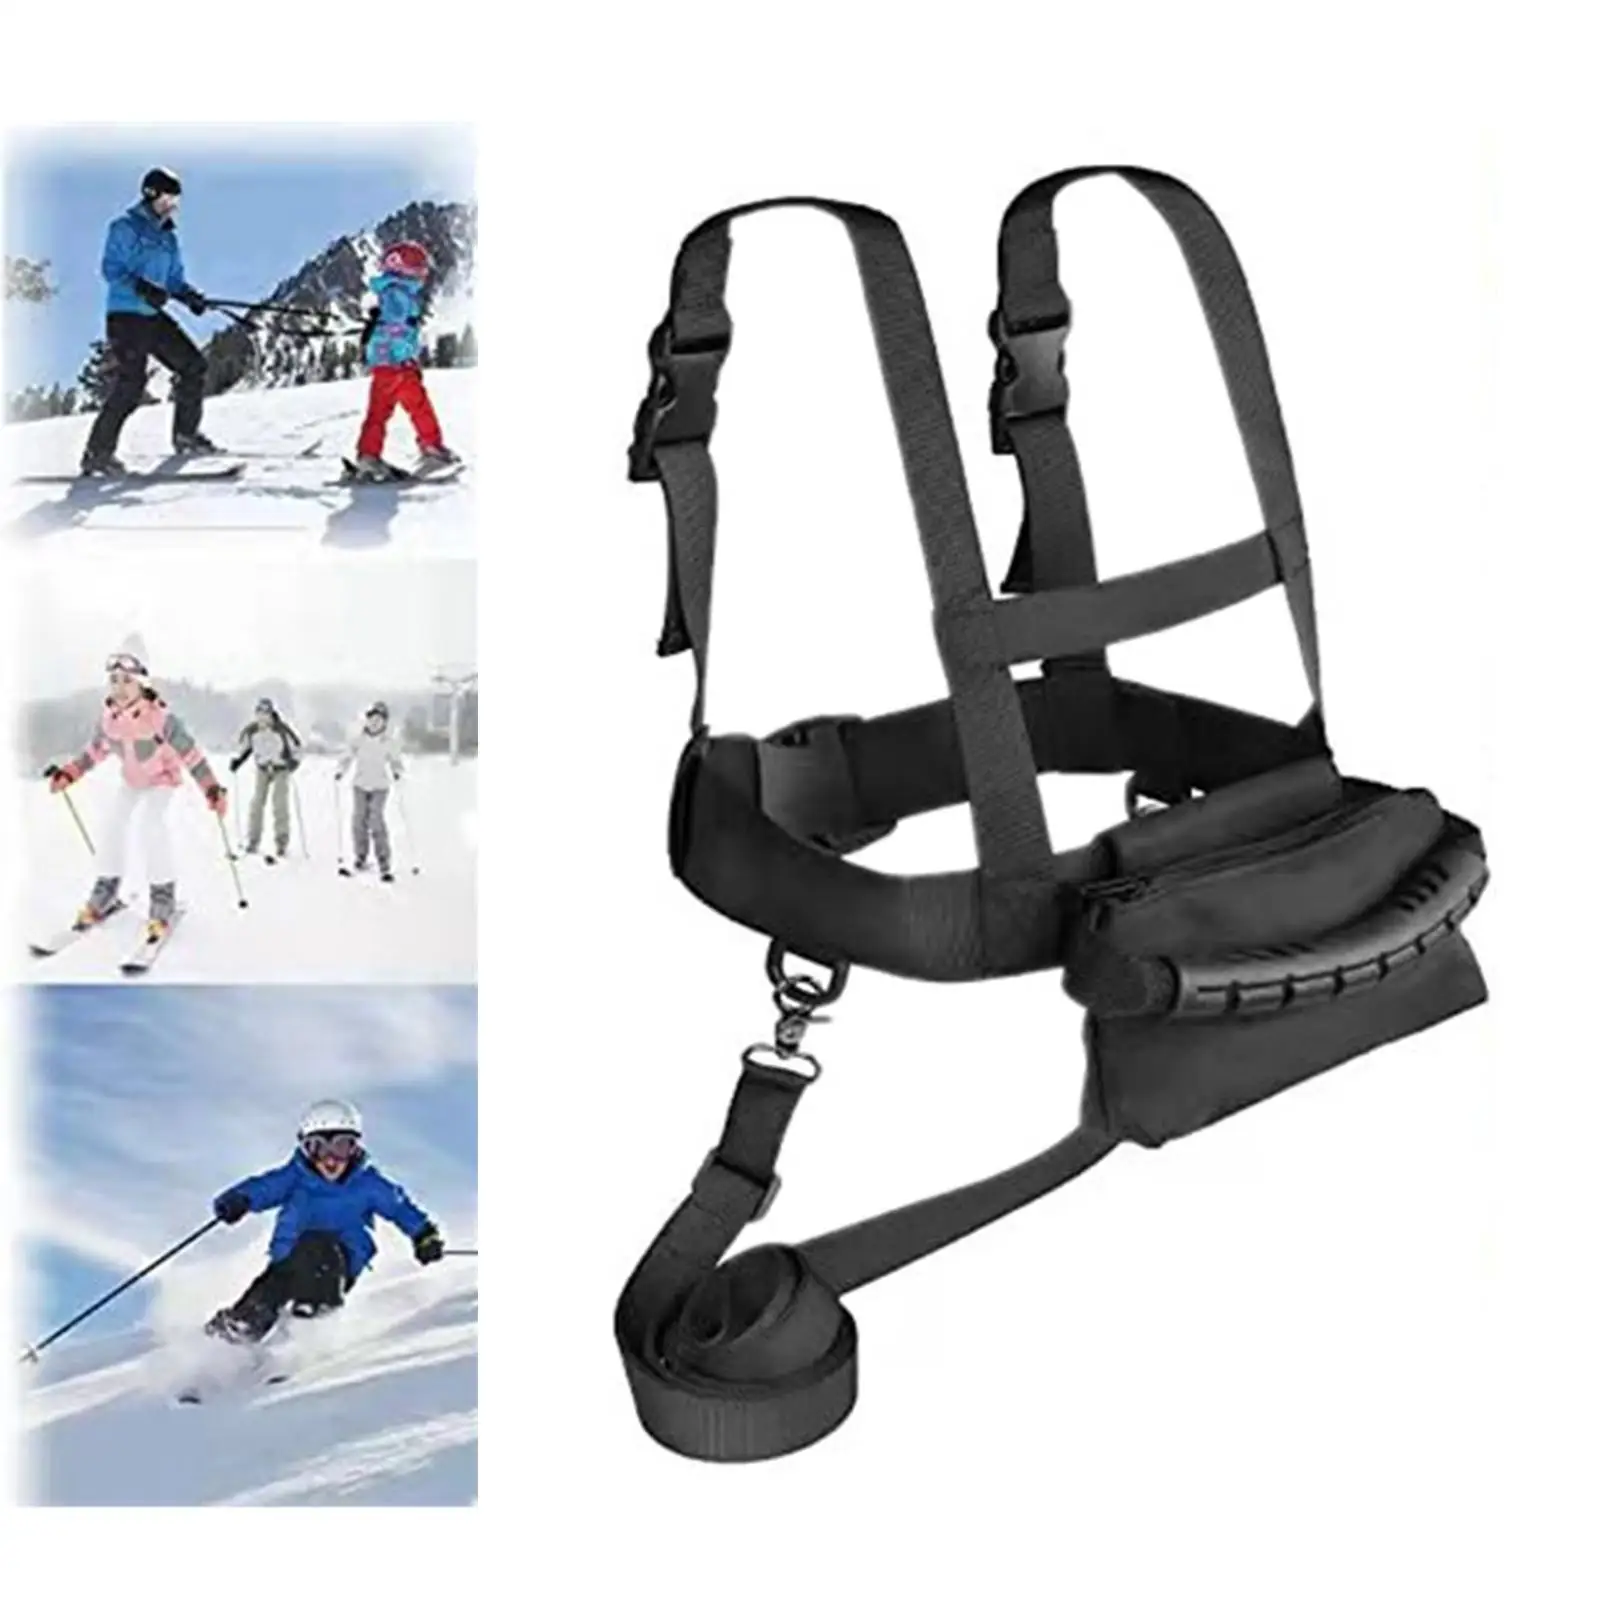 Ski and Snowboard Harness Trainer for Kids  Leash Equipment Prepares Them to Handle The Slopes, Perfect for Beginners